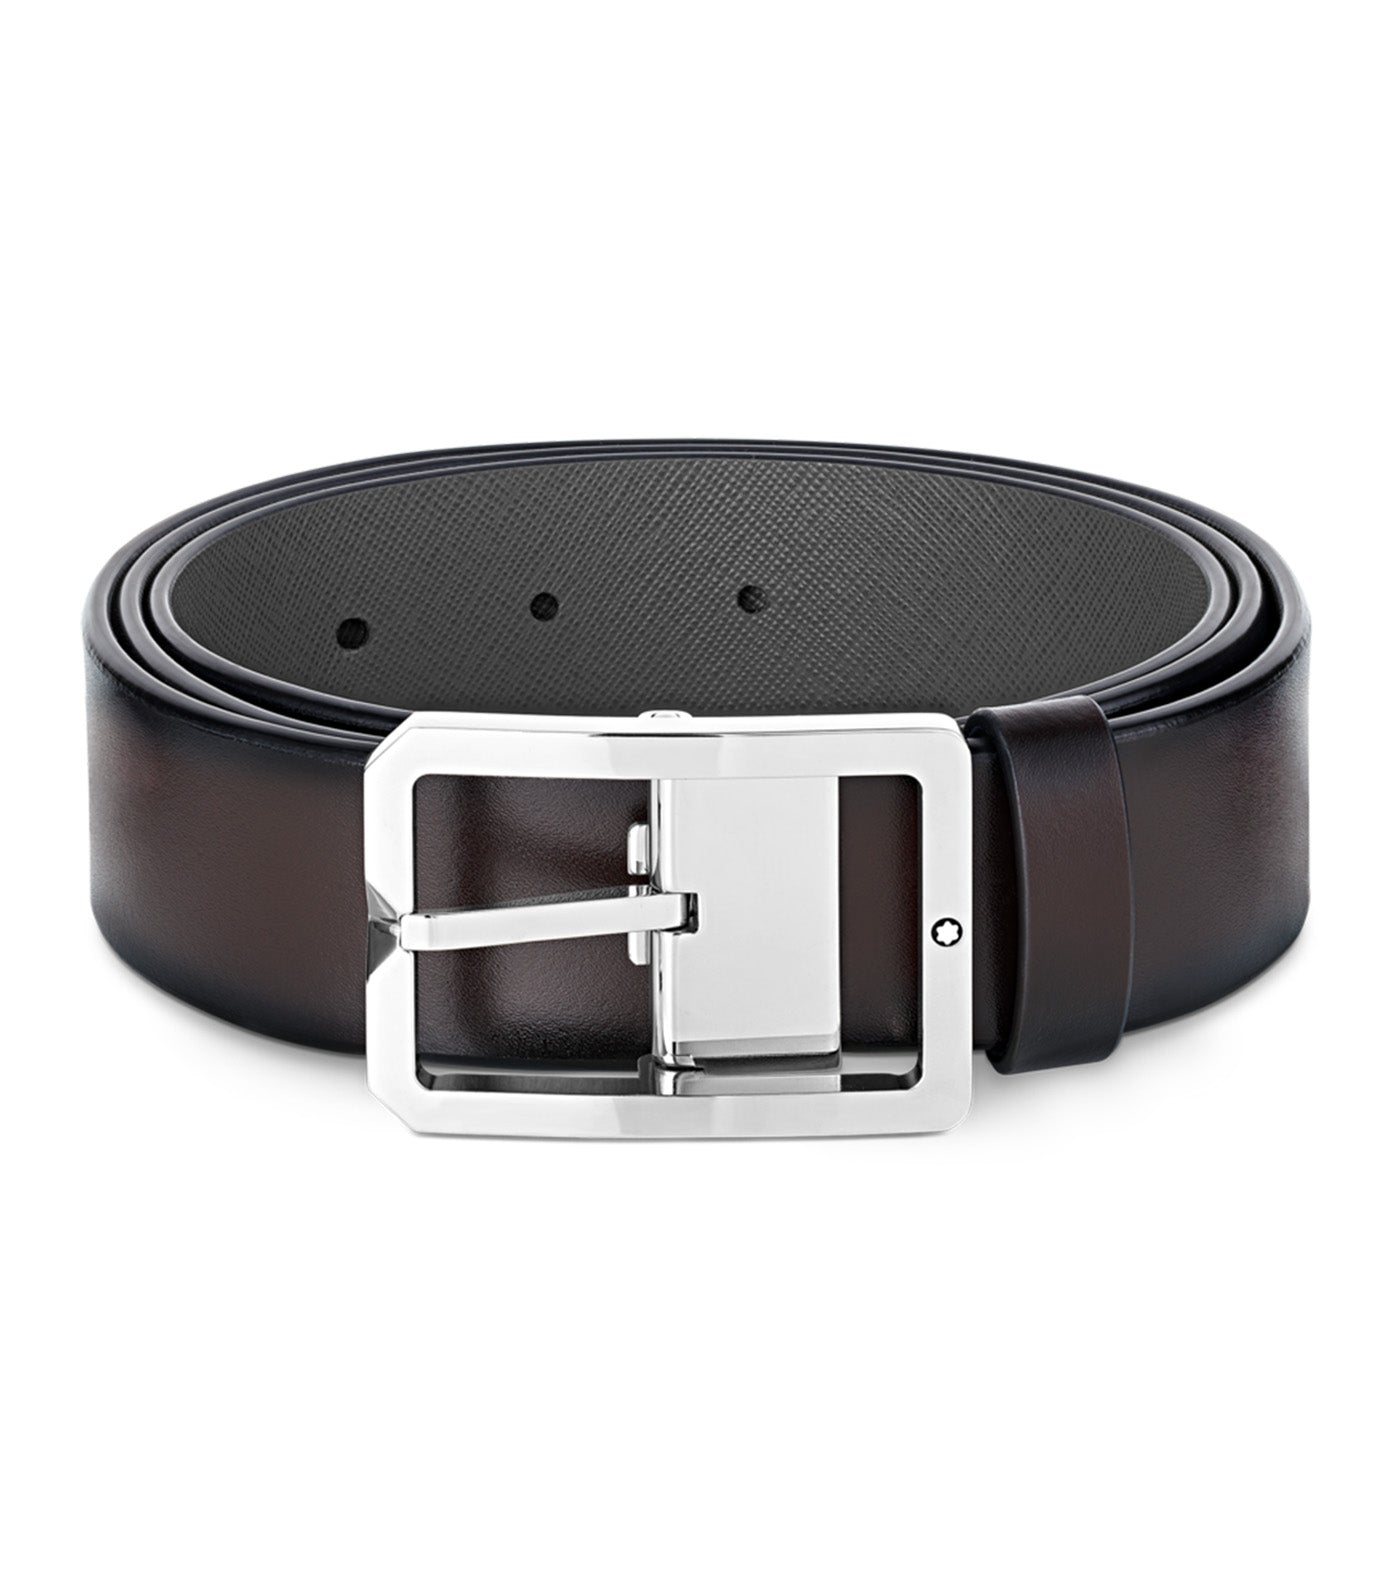 35mm Reversible Leather Belt Brown/Gray